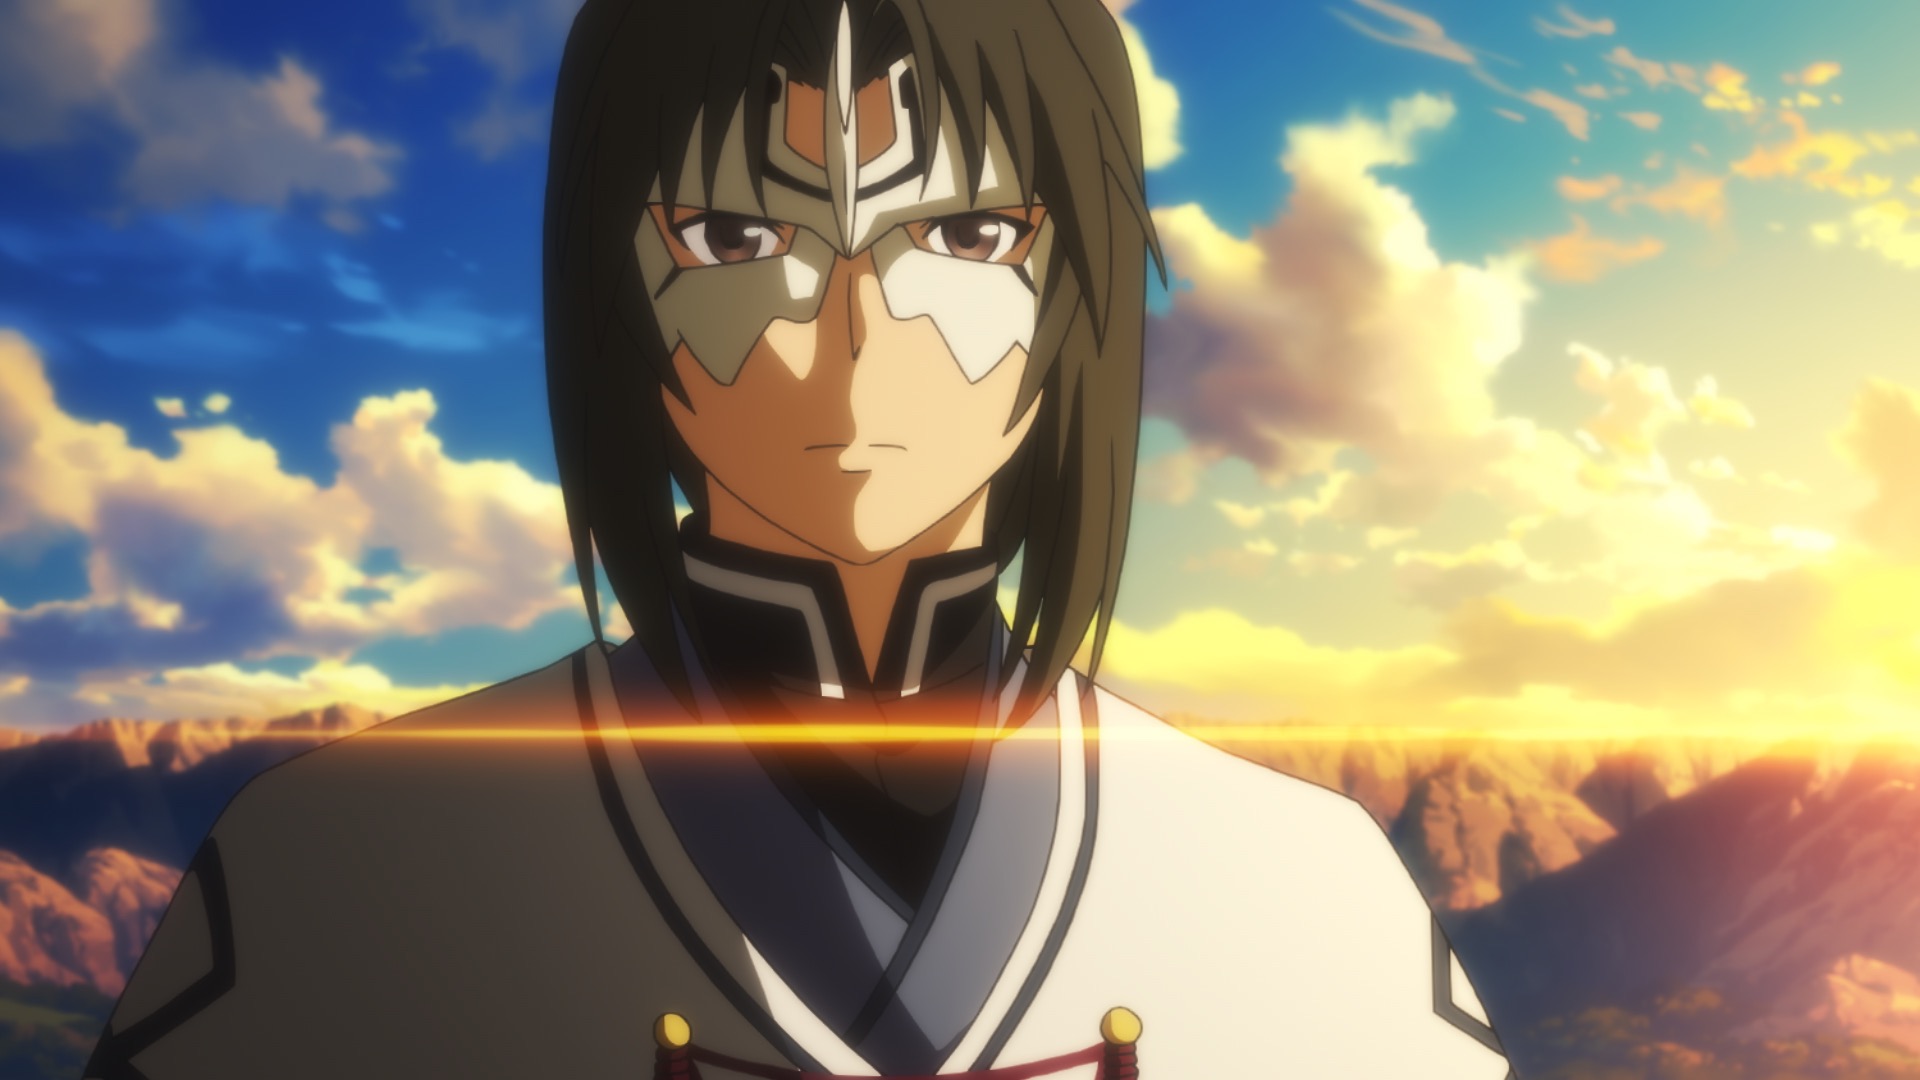 Engage Kiss - The Summer 2022 Preview Guide - Anime News Network